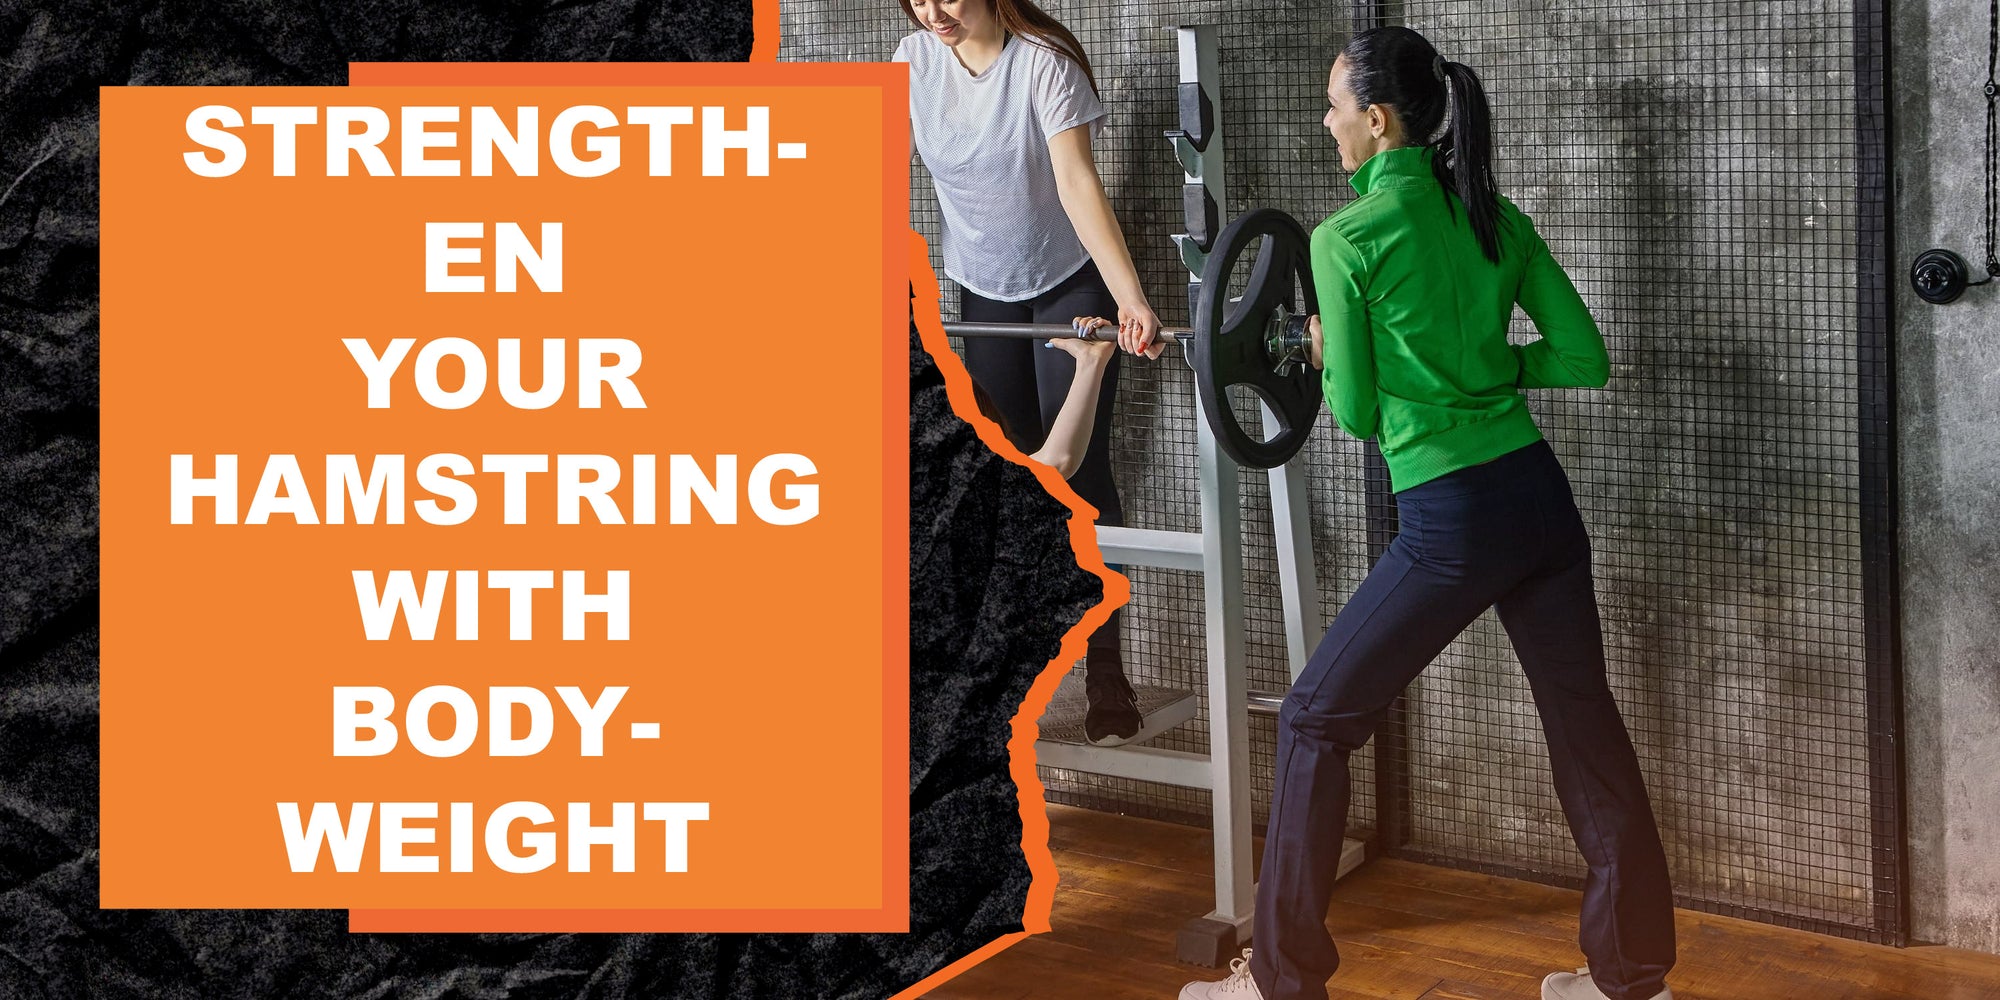 Increase Your Hamstring Strength with These Bodyweight Exercises